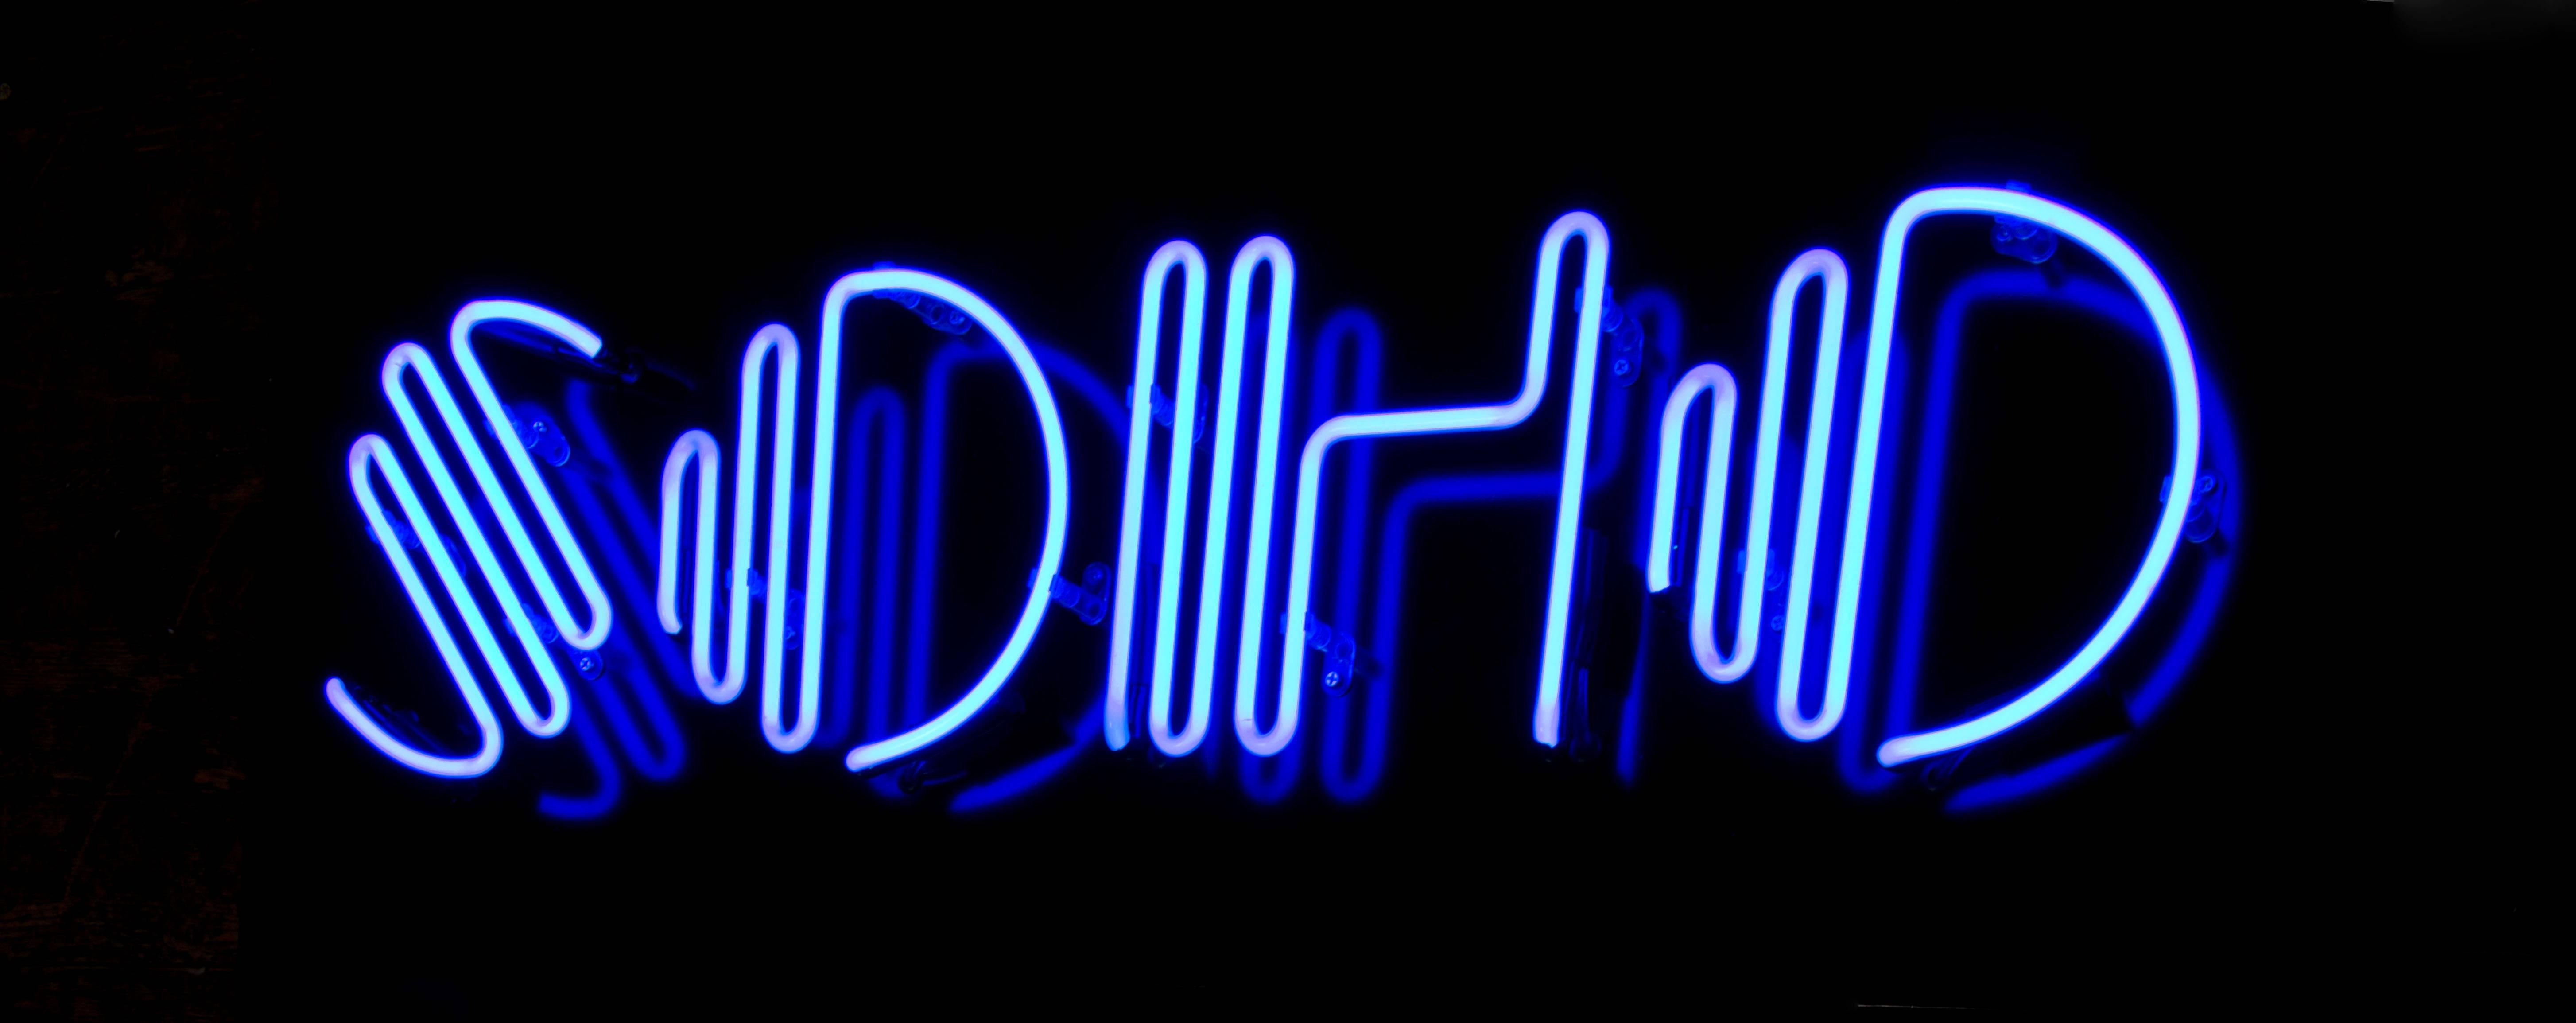 "SOHO" in Ben Eine neon typography.
Ben Eine.
Blue neon on black aluminium tray.
Measures: 100 x 40 x 7 cm.
Edition of 4.
£4500.

Ben Eine in collaboration with lights of Soho & Moniker projects are proud to present the first